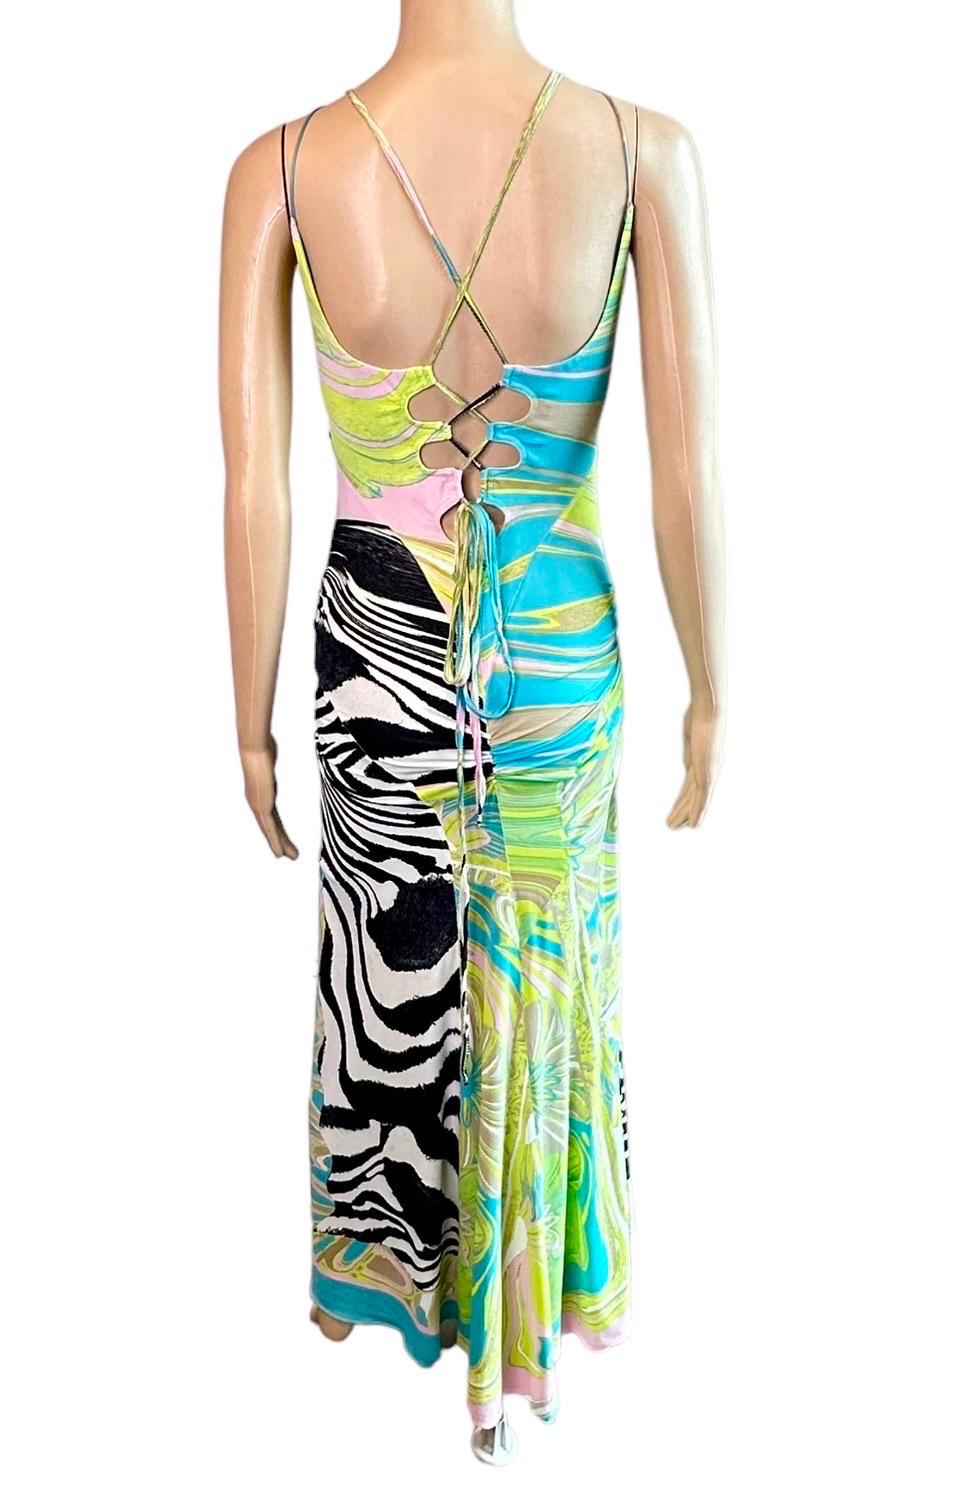 Roberto Cavalli S/S 2004 Cutout Lace Up Plunging Neckline Maxi Evening Dress For Sale 3